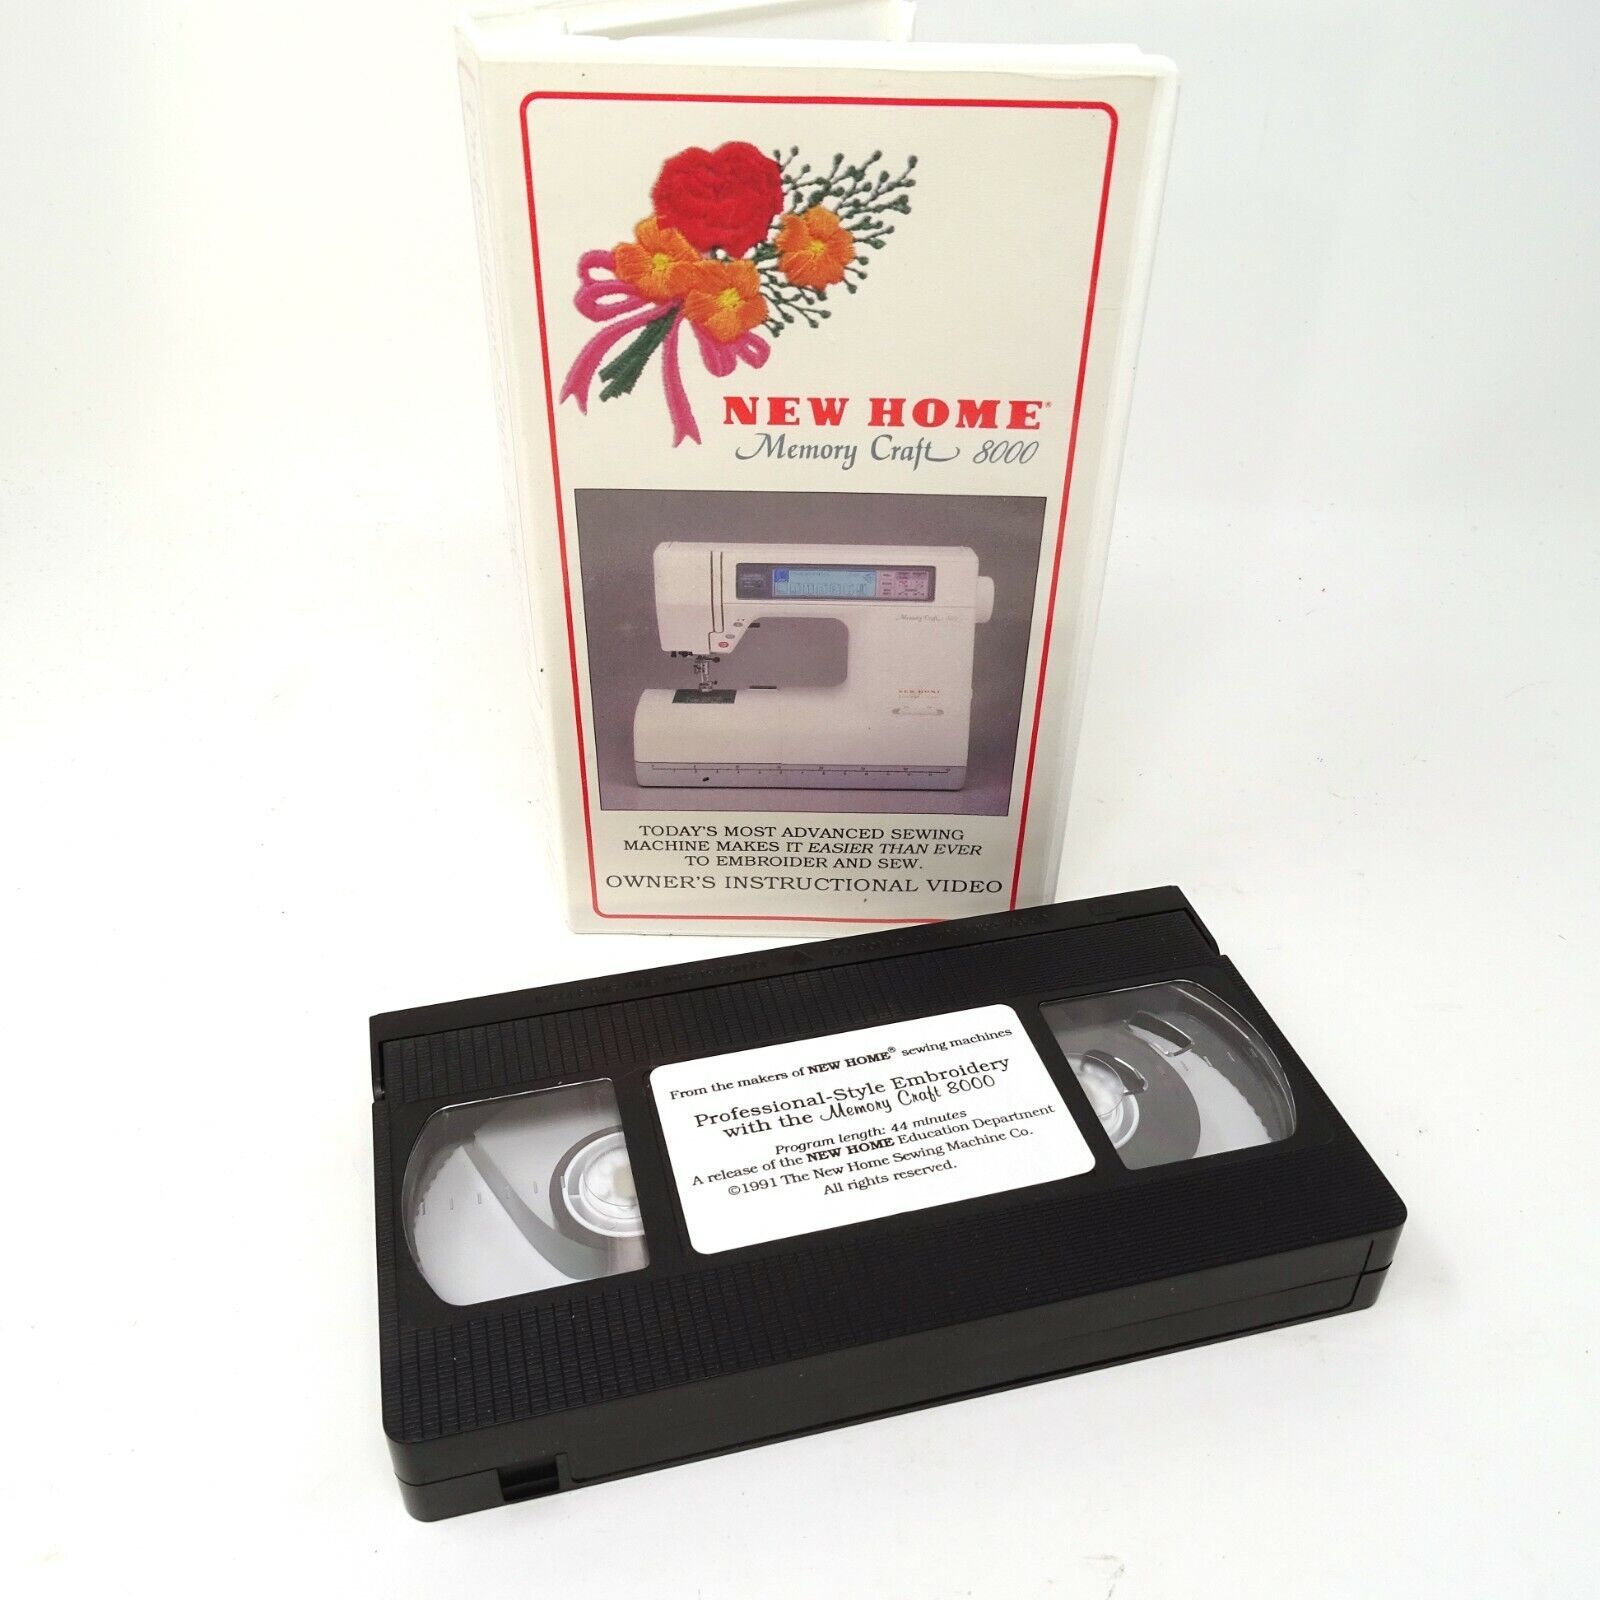 New Home Memory Craft 8000 Embroidery Owner's Instructional Video VHS + Projects - $4.99